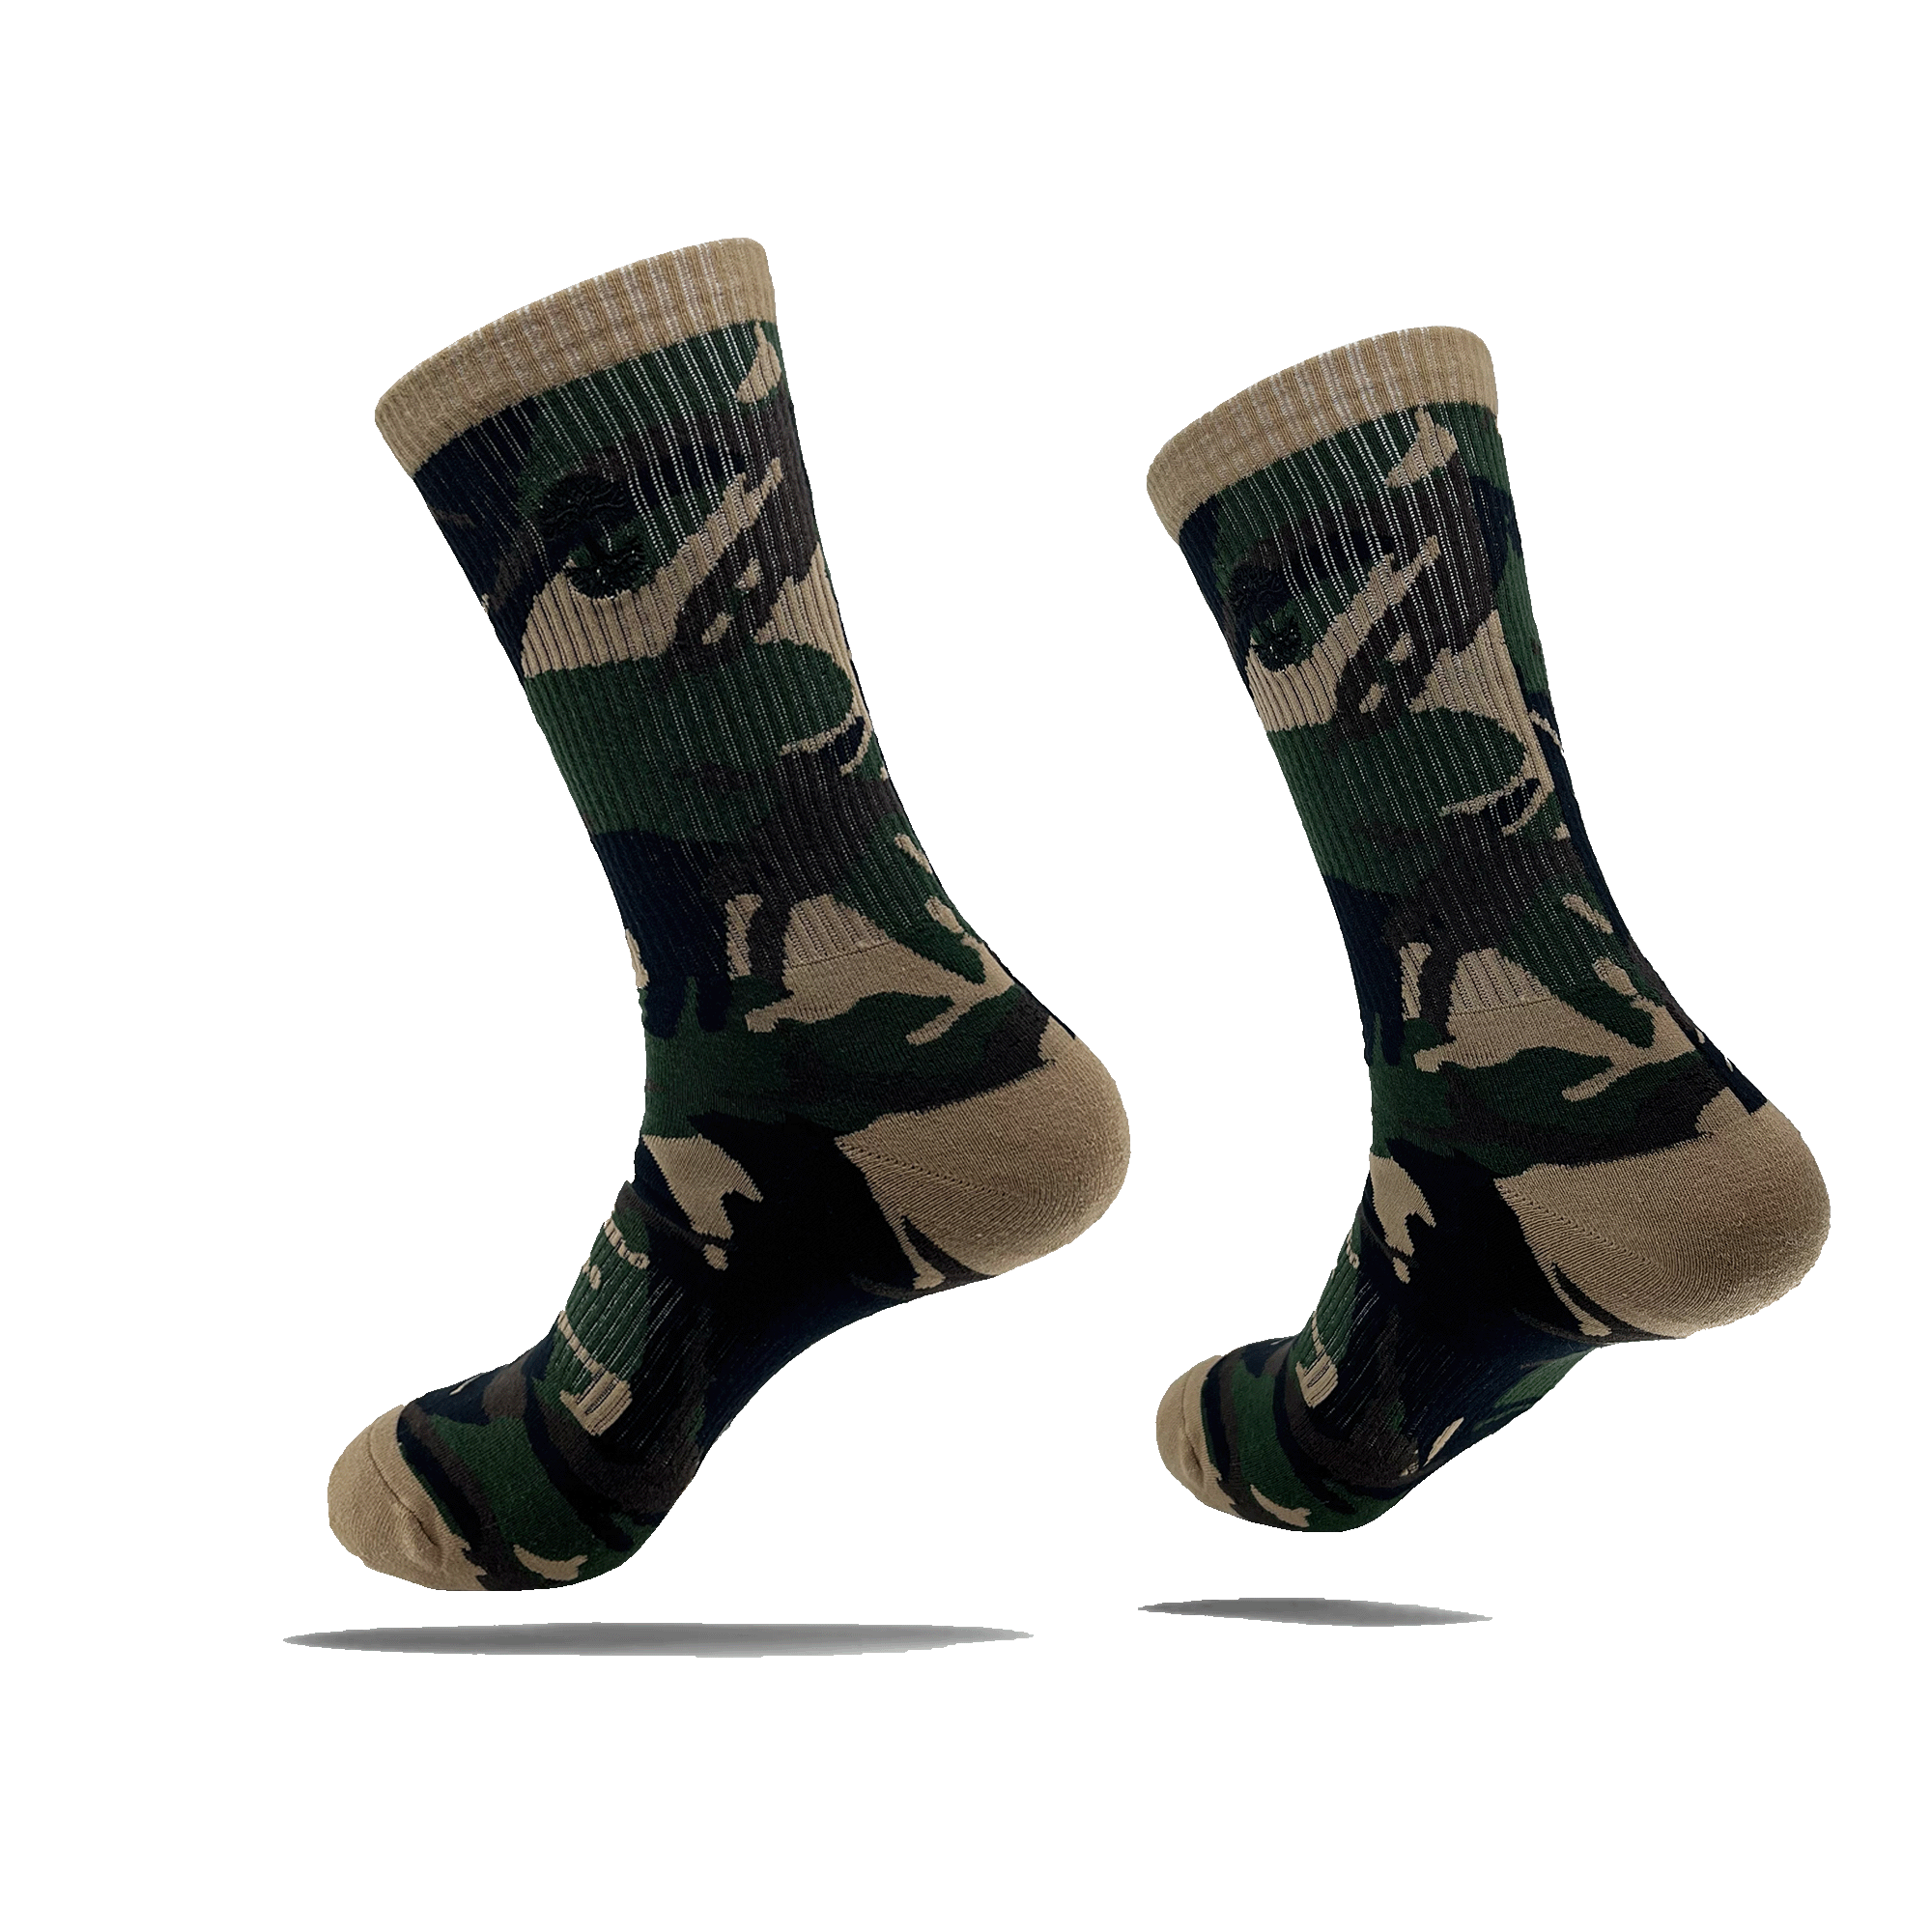 Side view of camo crew socks with a small black Oaklandish tree logo on the side calves.